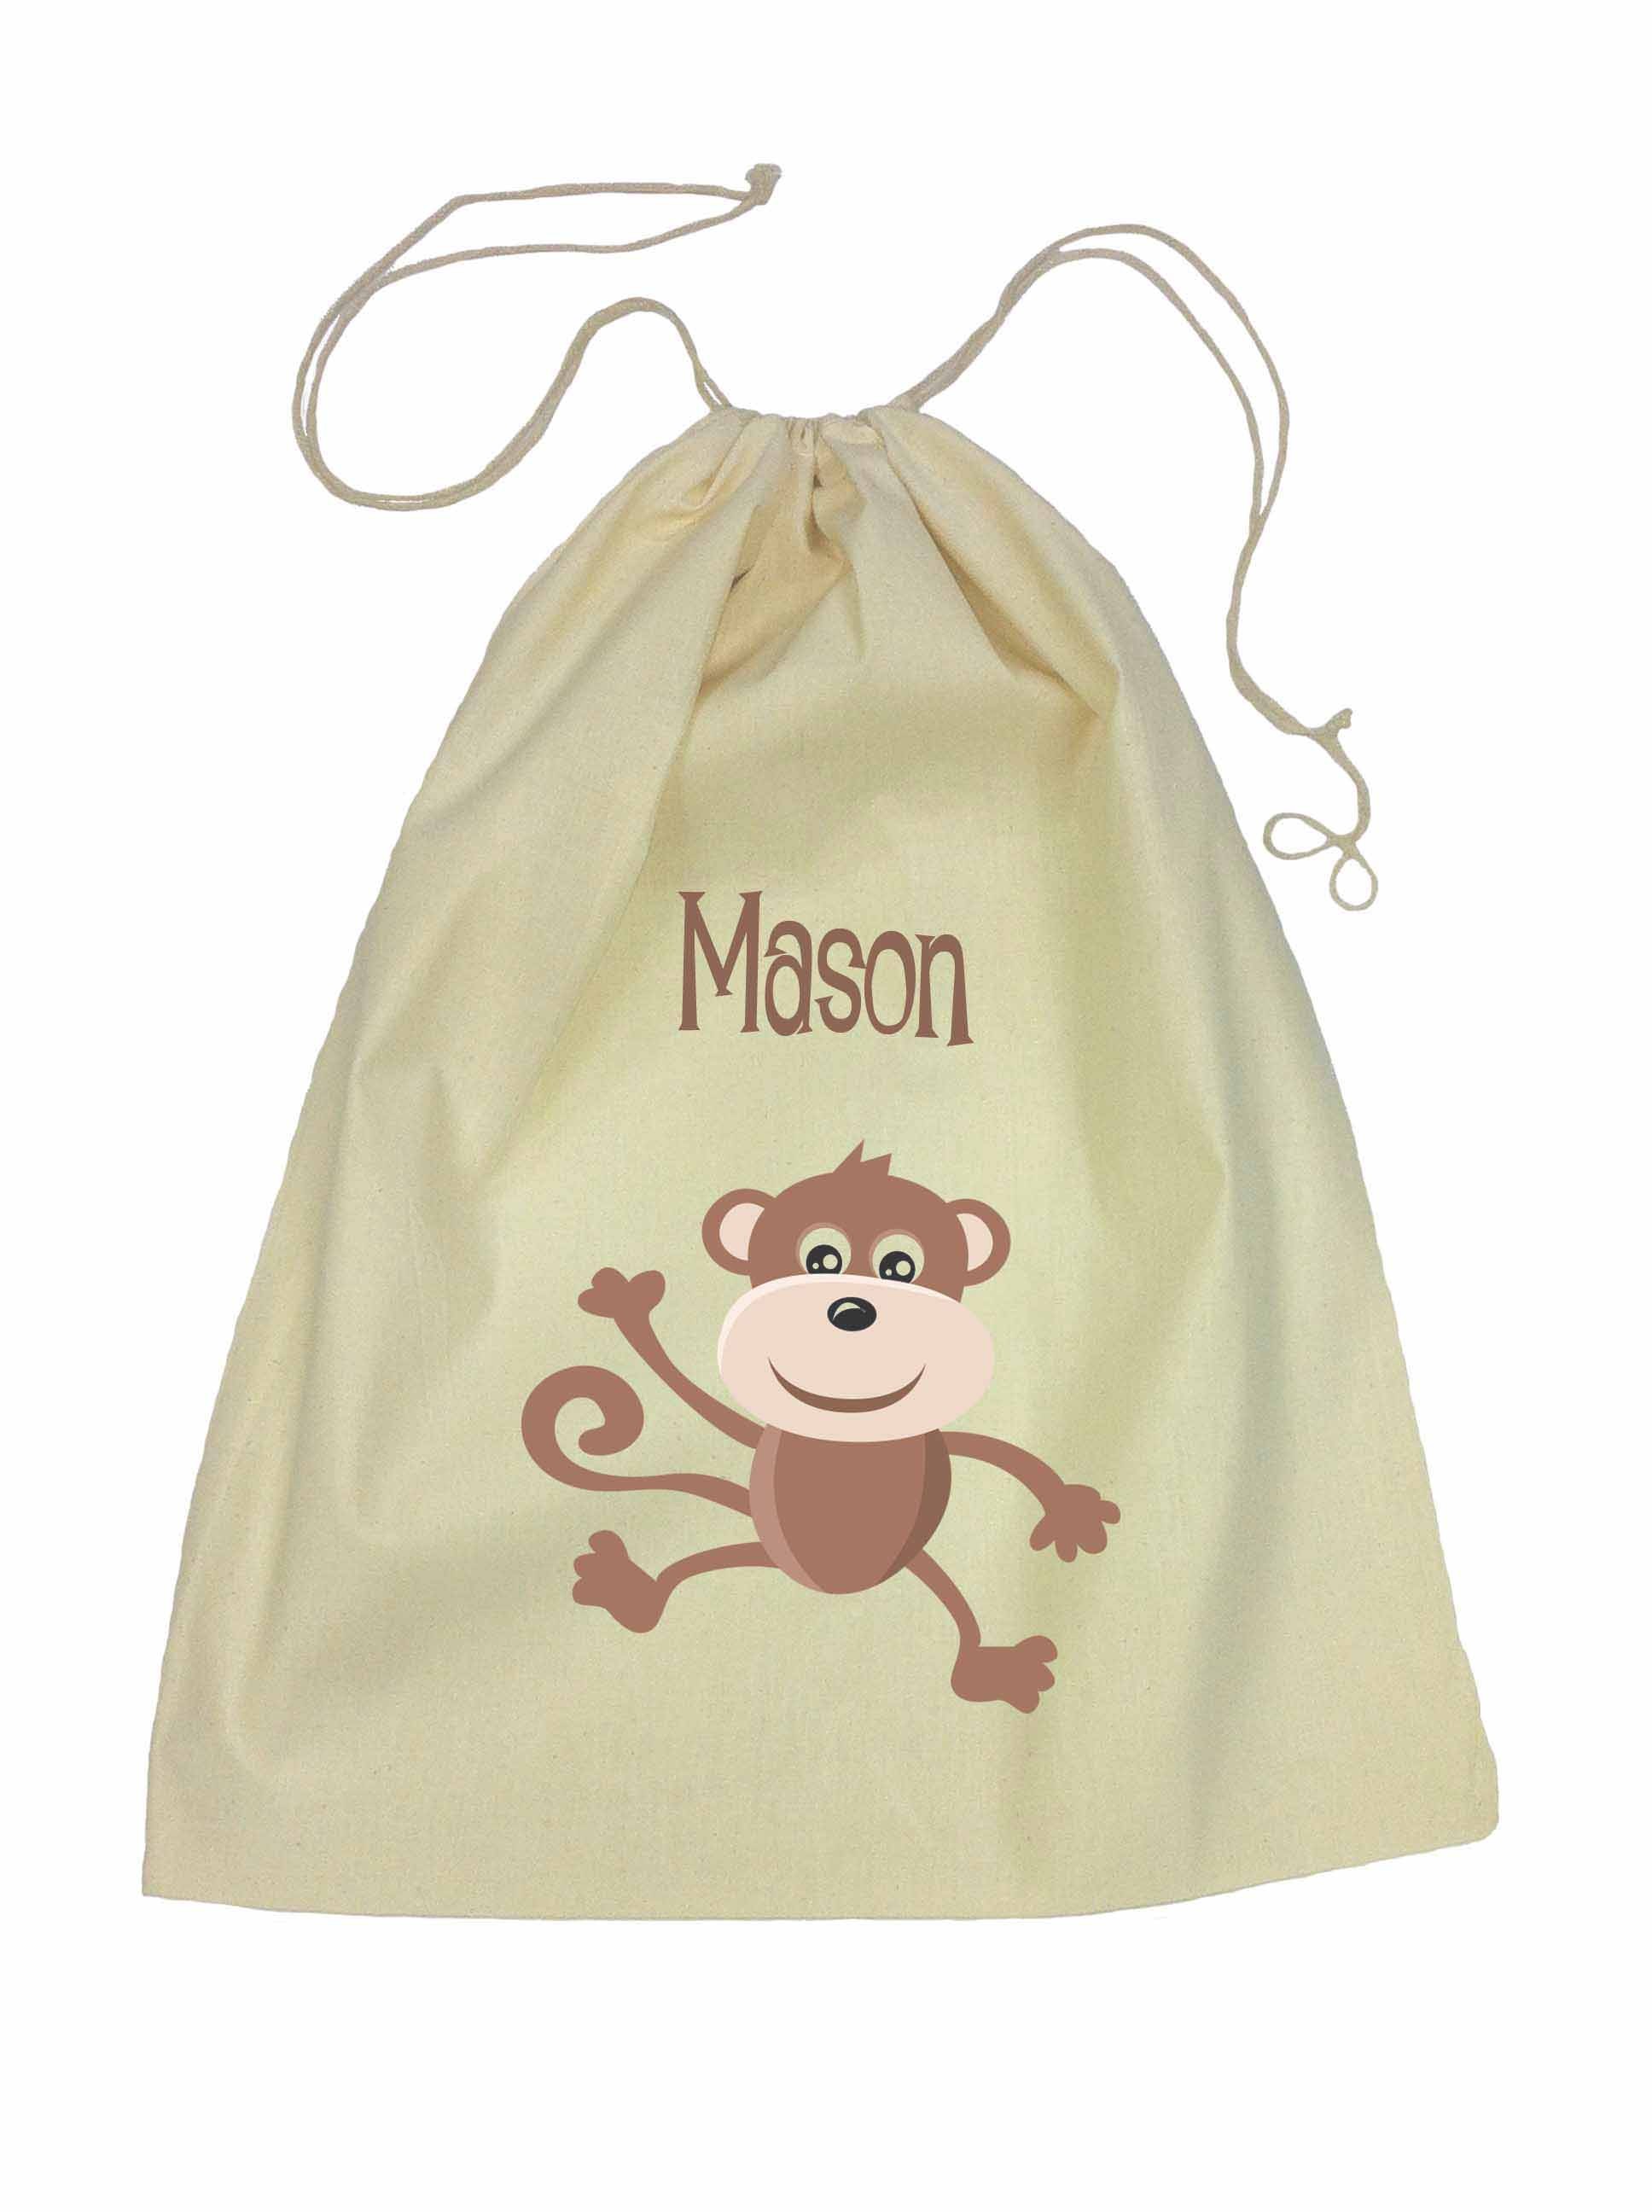 Drawstring Library Bag with Brown Monkey